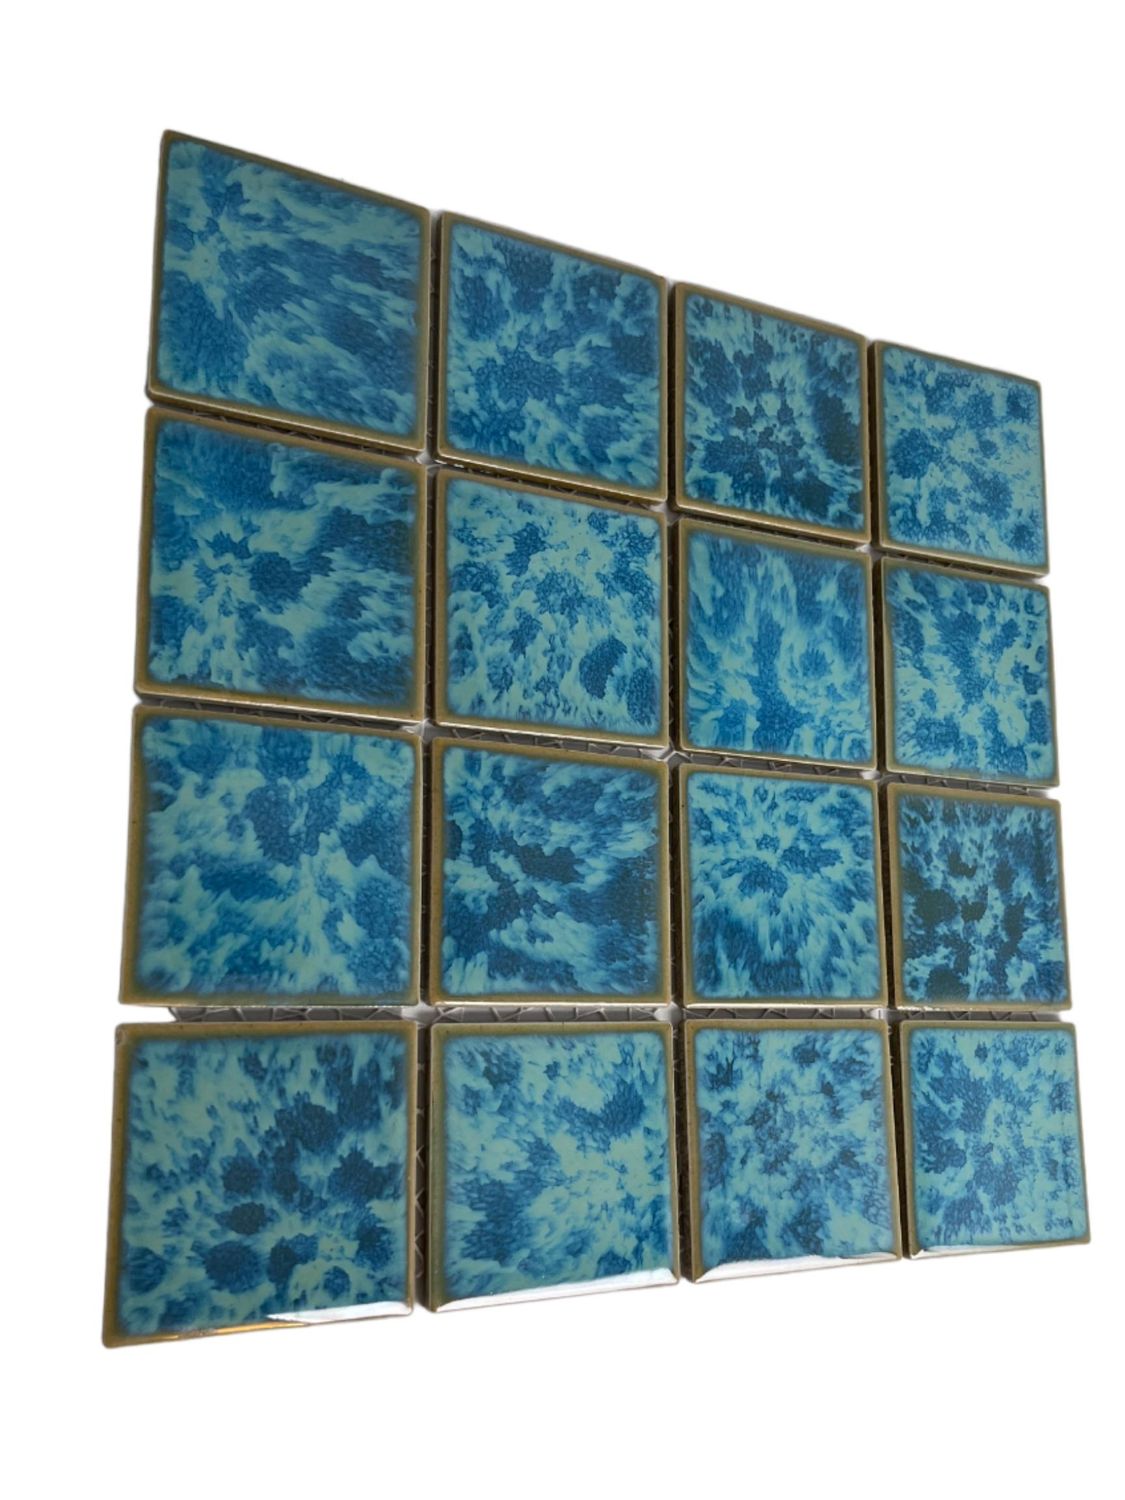 Tenedos TBHMD-3x3-PL Ocean Green Jellyfish Square Square 3x3 Porcelain Pool Mosaic Floor and Wall Tile for Backsplash, Kitchen, Bathroom, Swimming Pool